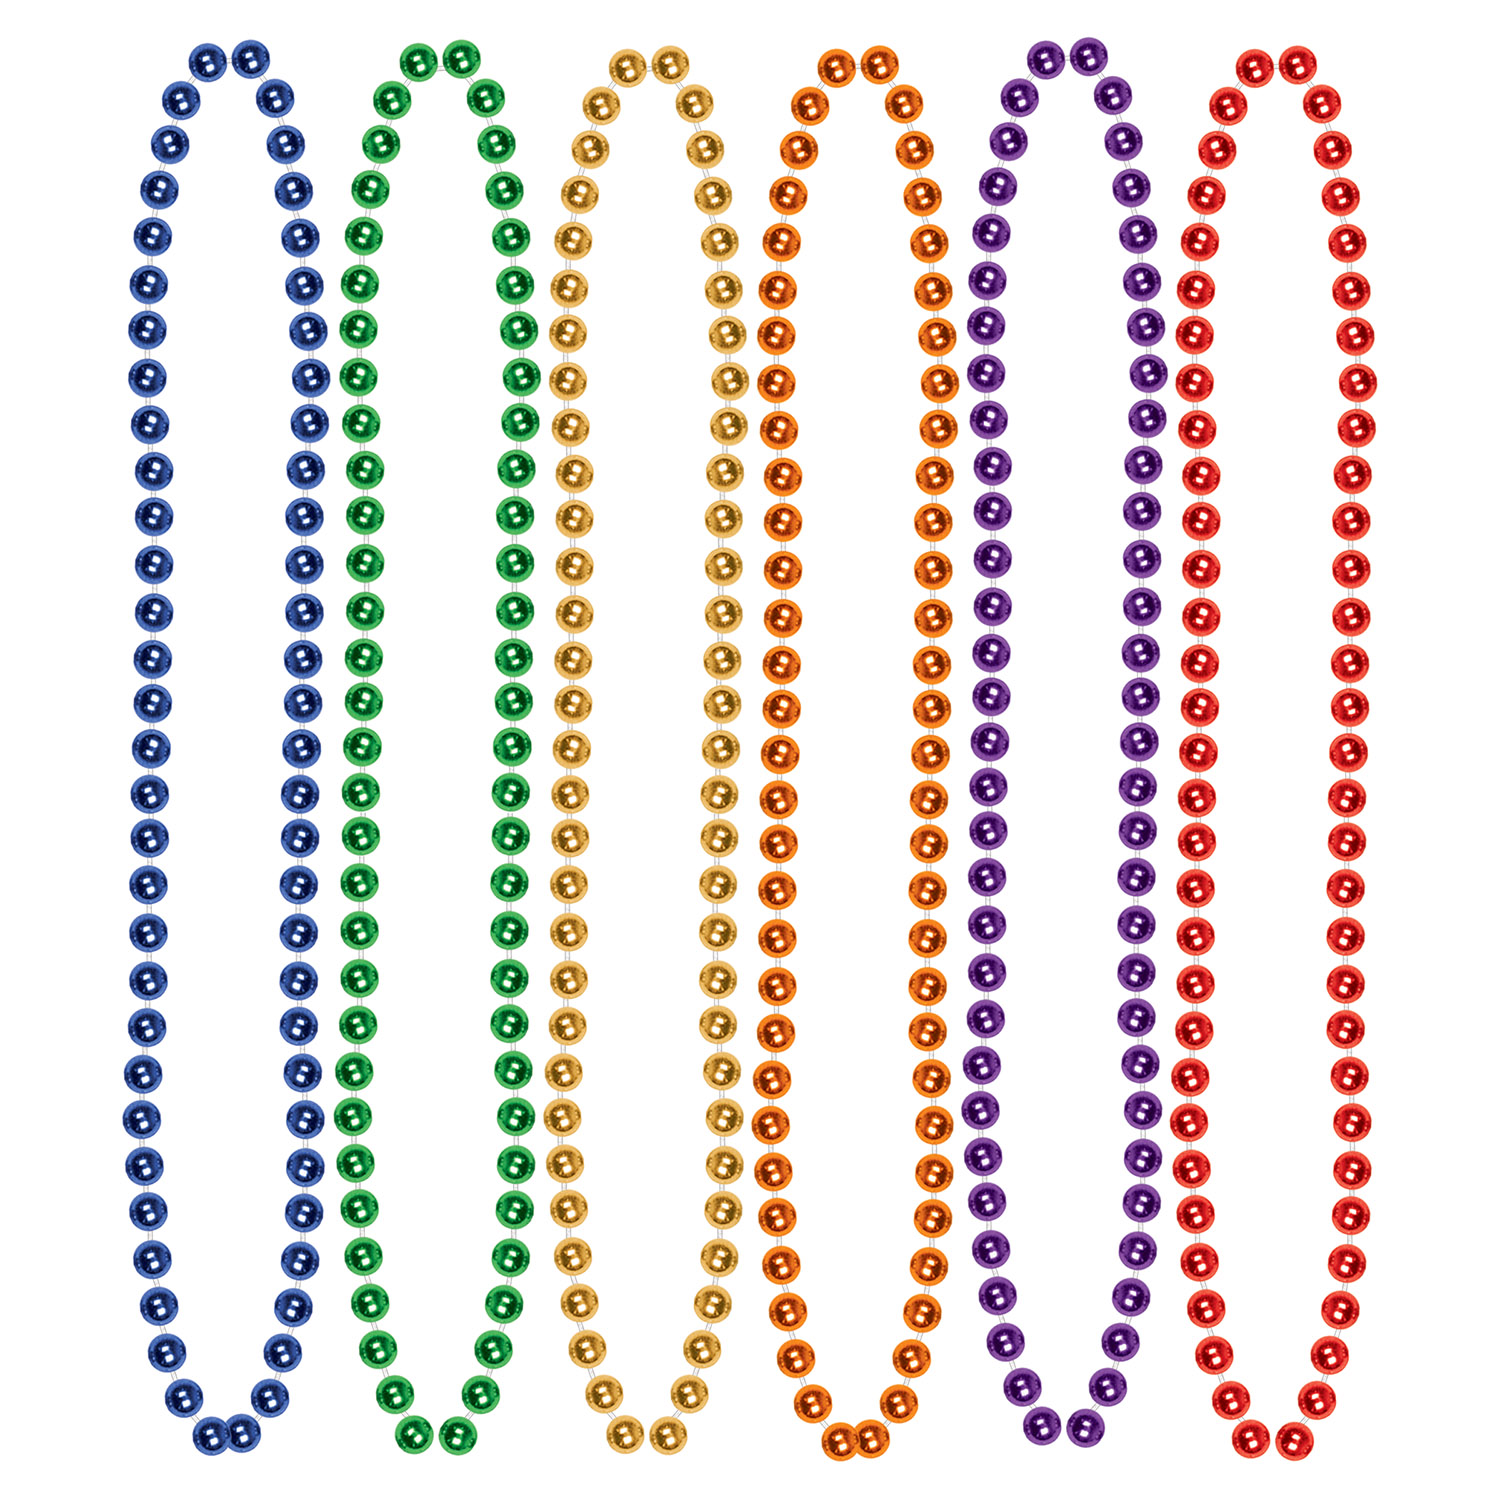 Bulk Party BEADS - Small Round